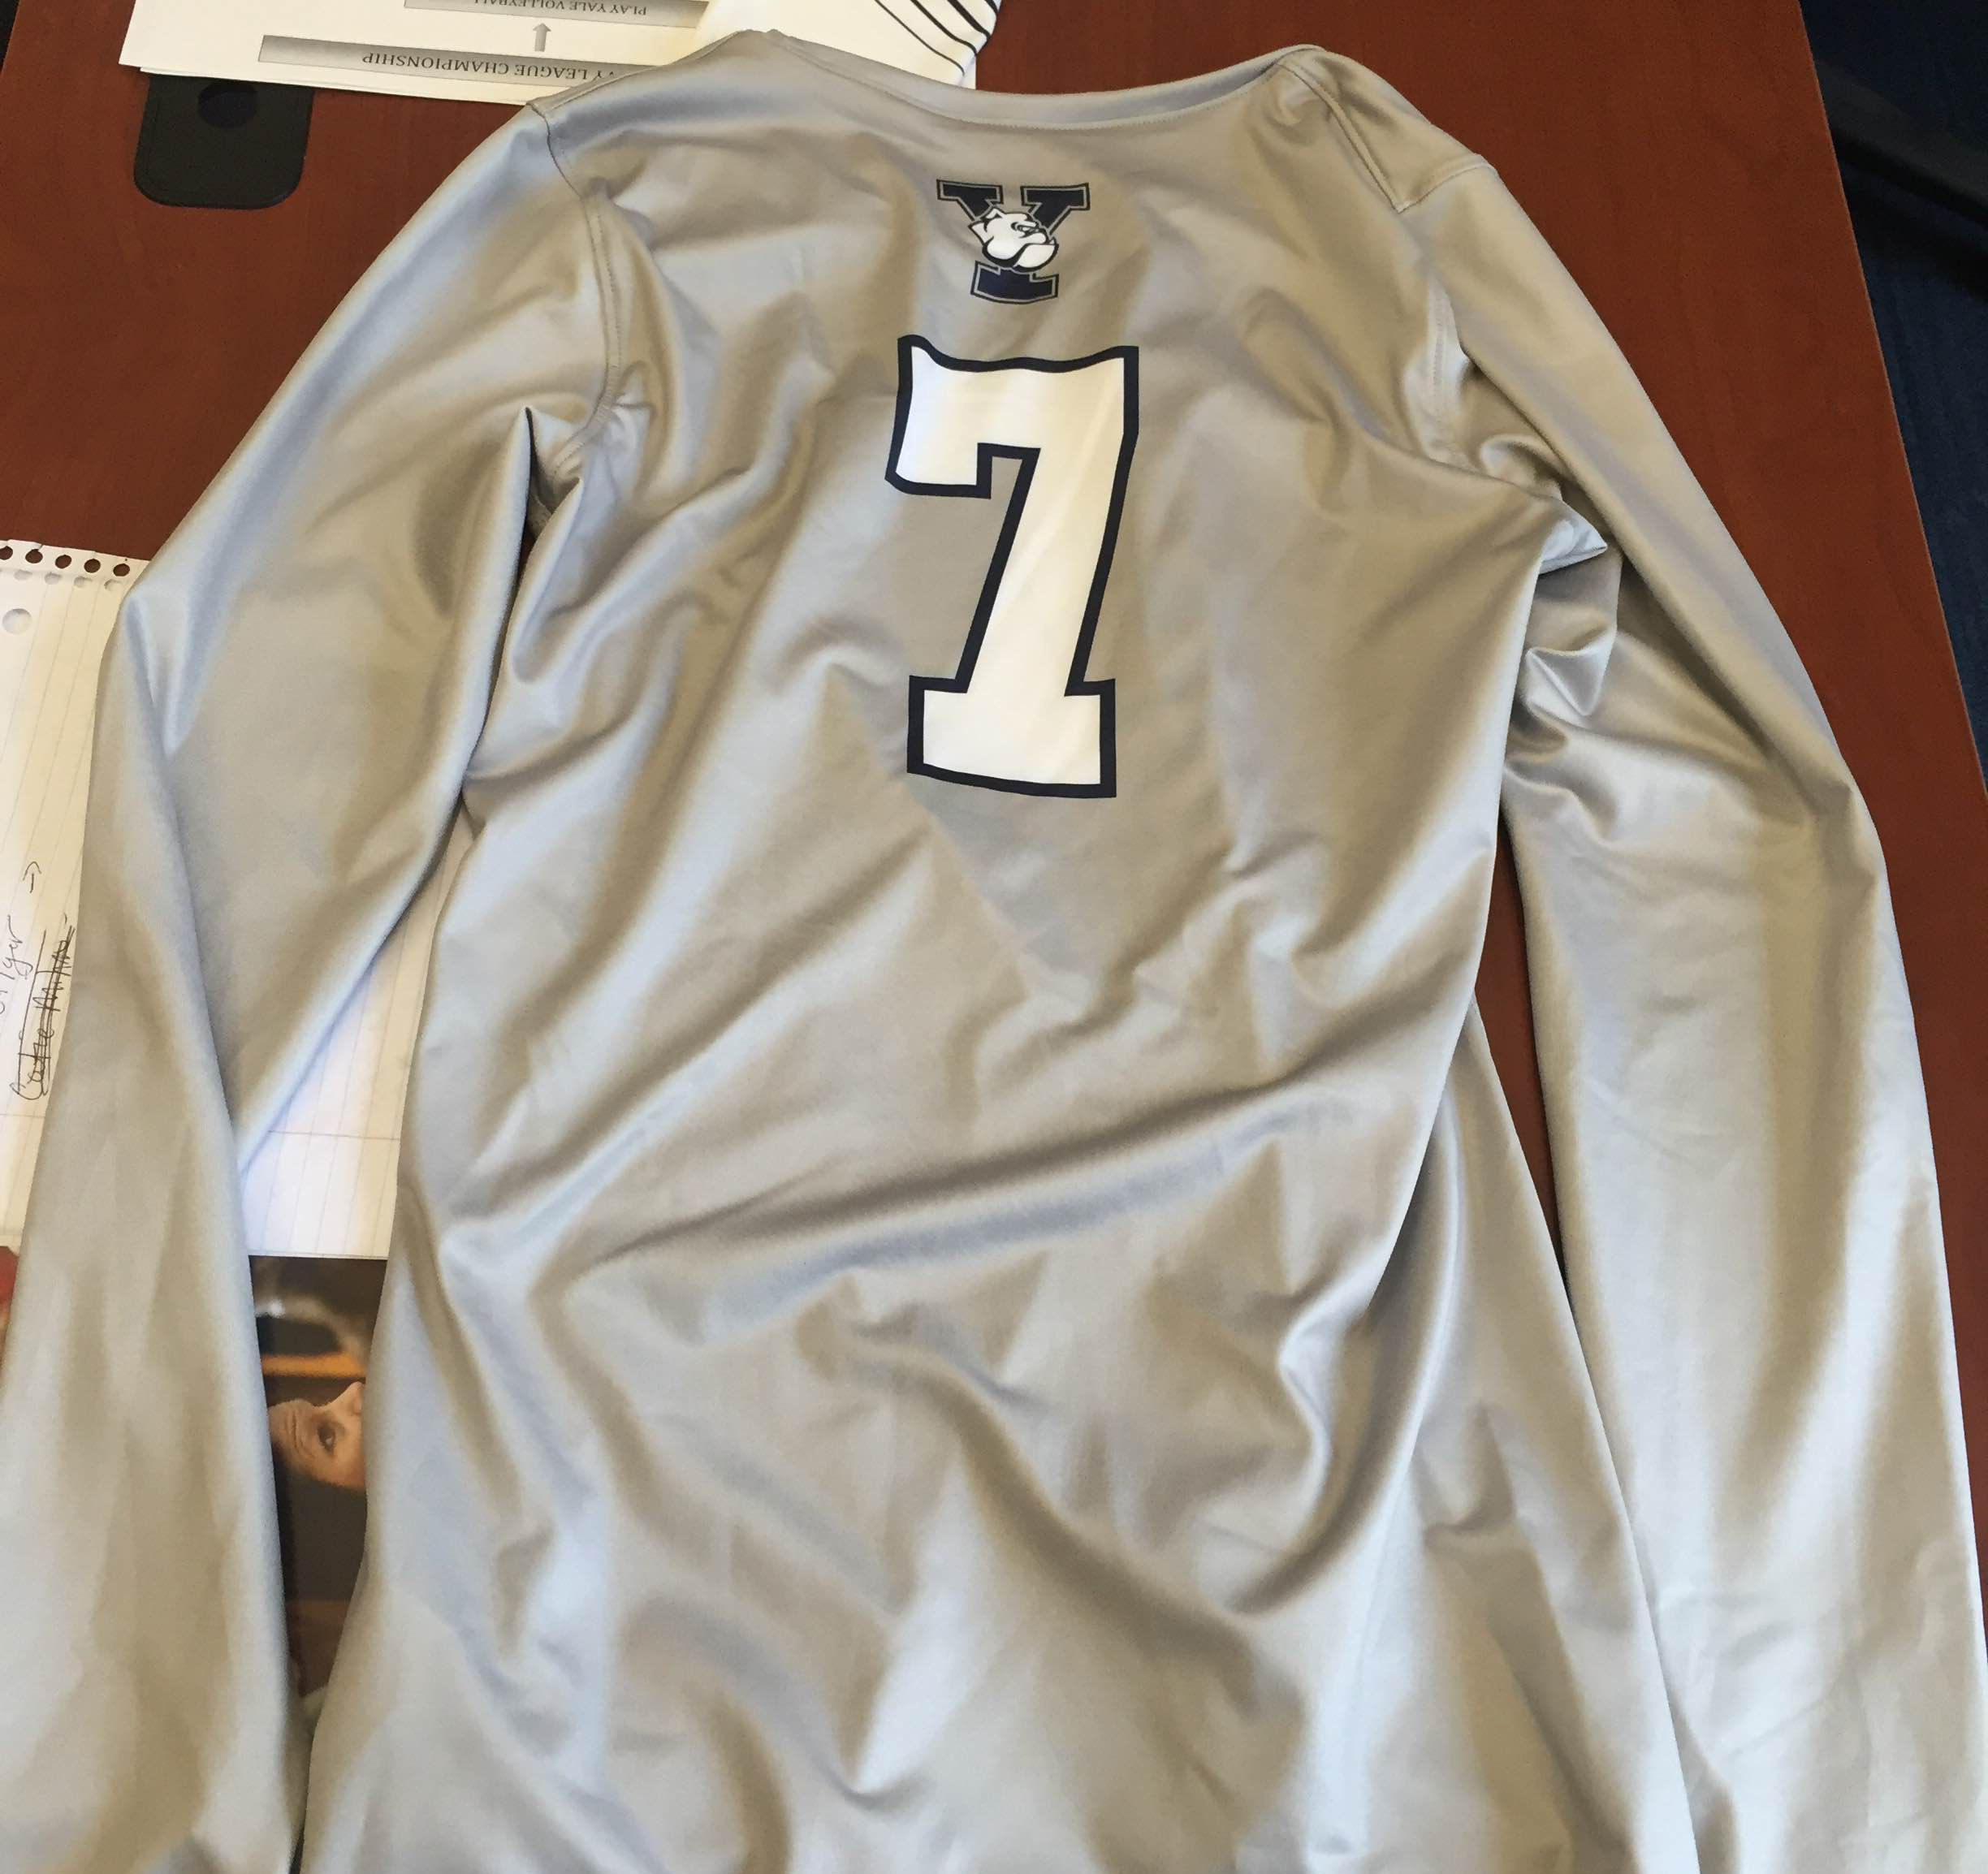 Under Armour uniforms near completion - Yale Daily News